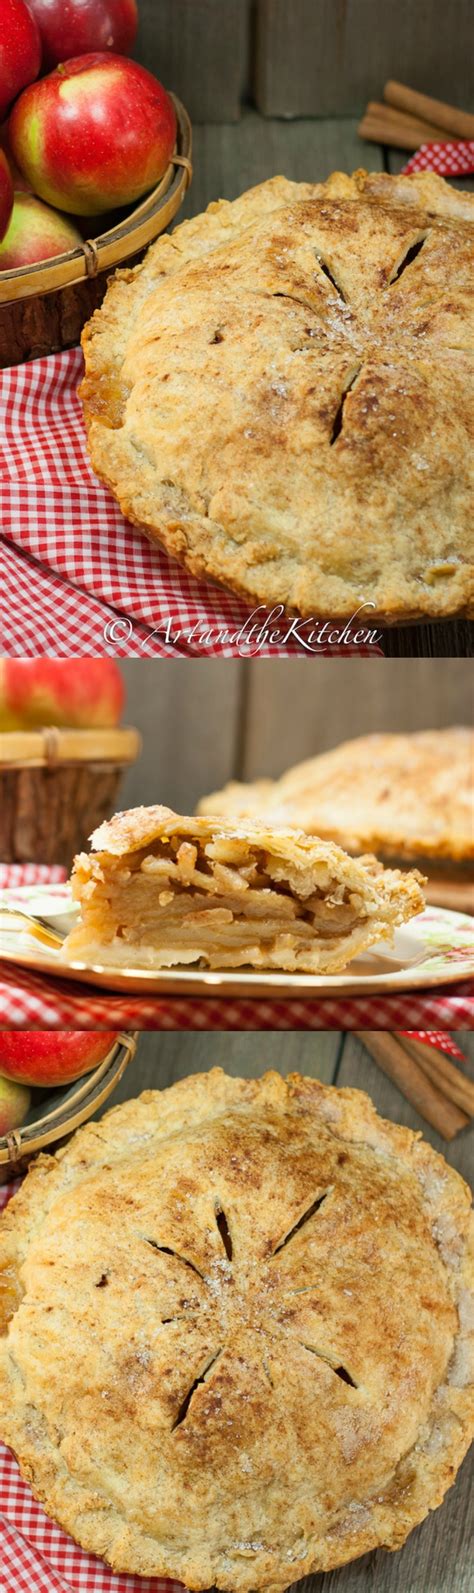 Sift and measure flour into. Grandma's Old Fashioned Apple Pie | Art and the Kitchen